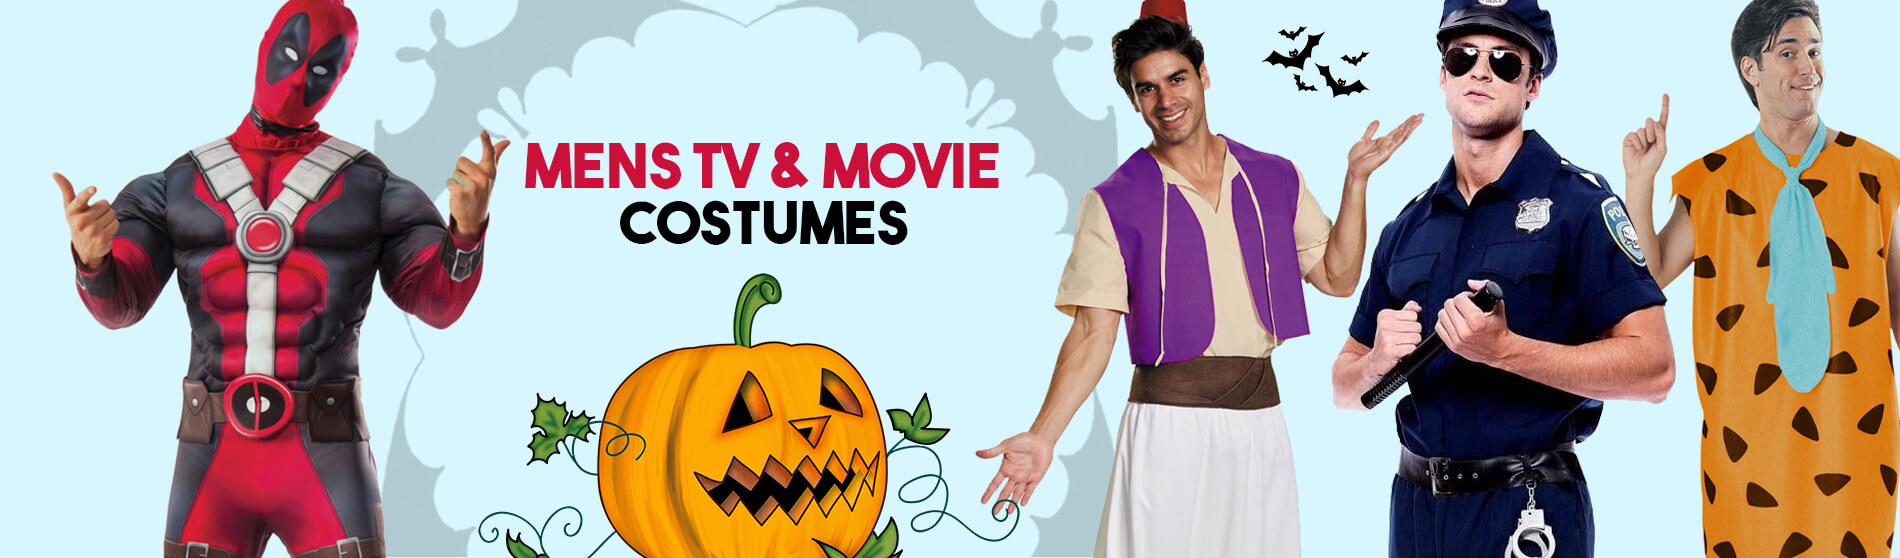 Glendale Halloween : Mens-TV-and-Movie-Costumes